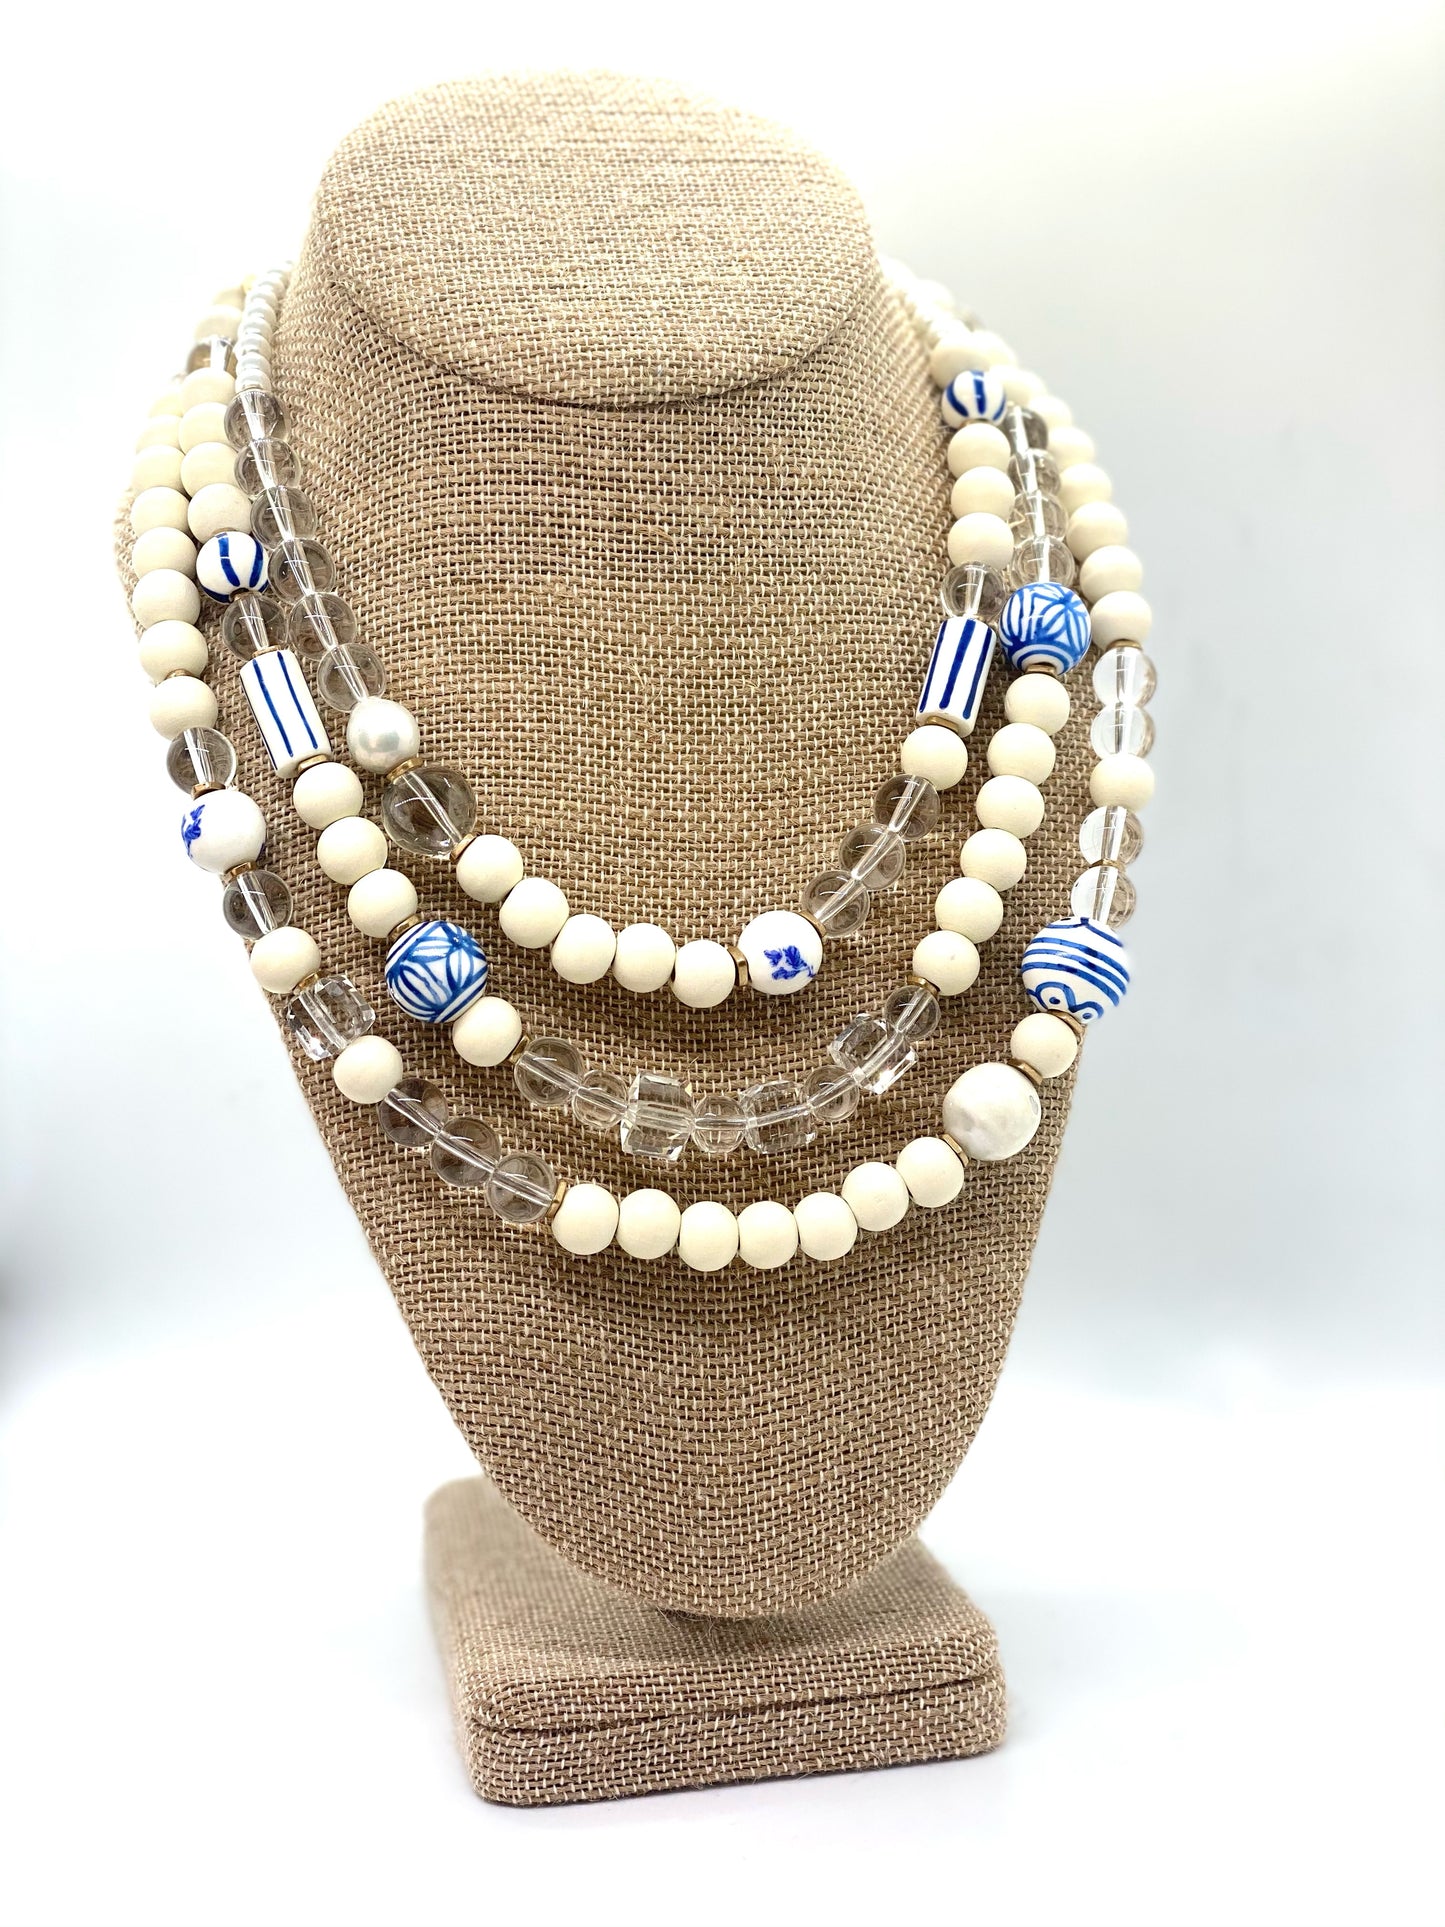 Blue and White Wooden Beads Necklace